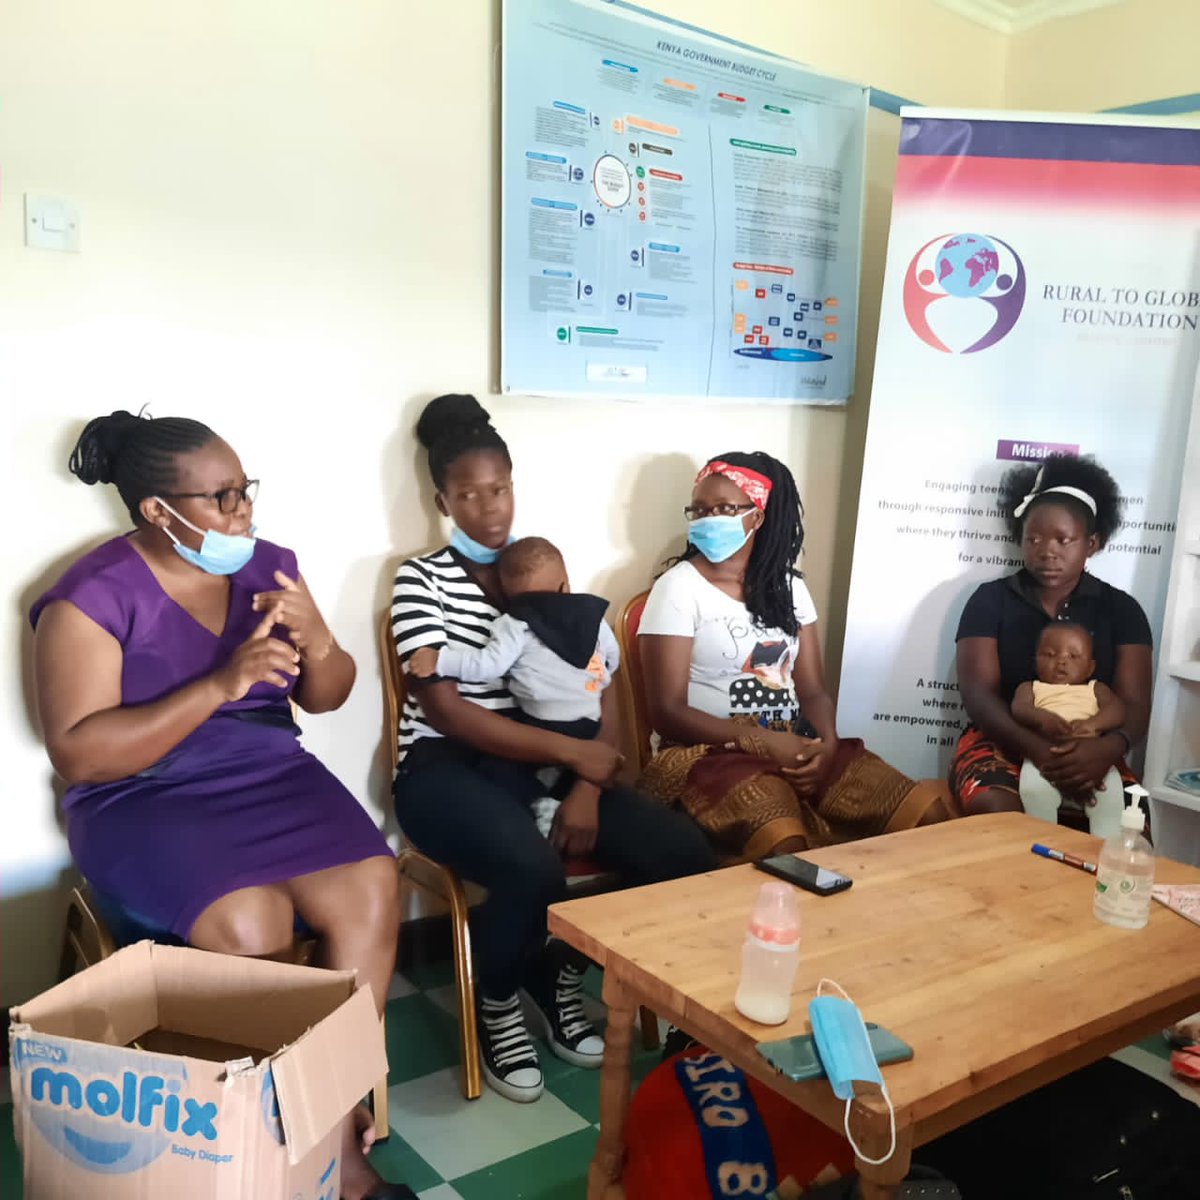 As we continue equipping our Young Women with knitting skills through the Young Women Economic Empowerment project, we keenly Engage them in candid #SRHR discussions on how to prevent and protect themselves from the ravaging impacts of gender based violence @awdf01 @KAS_Kenya